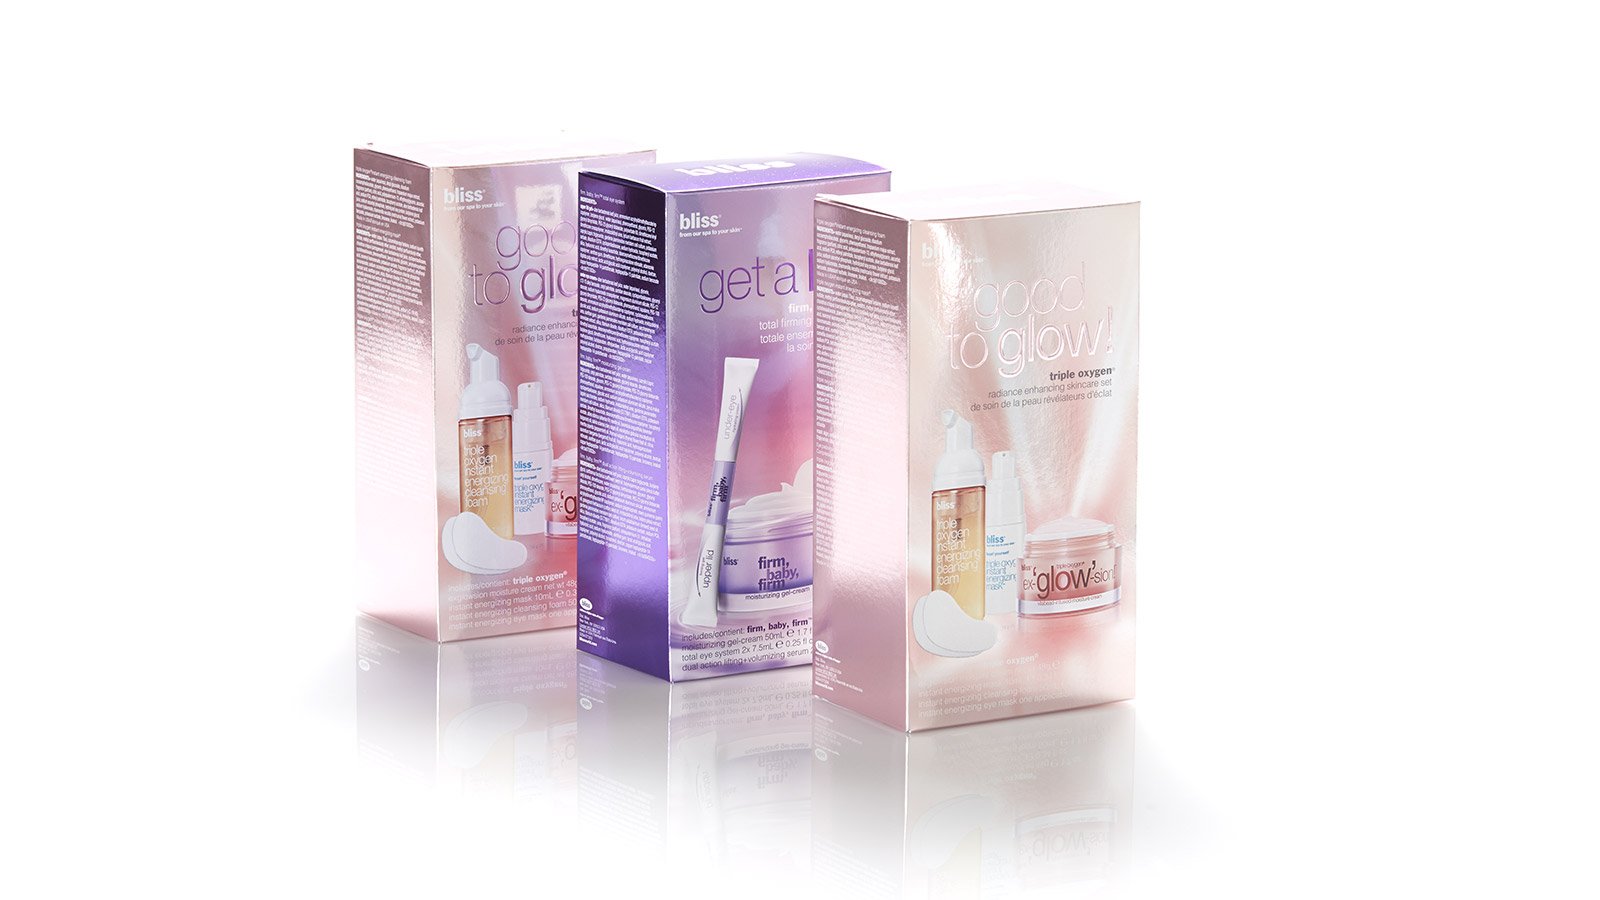 bliss coated beauty packaging